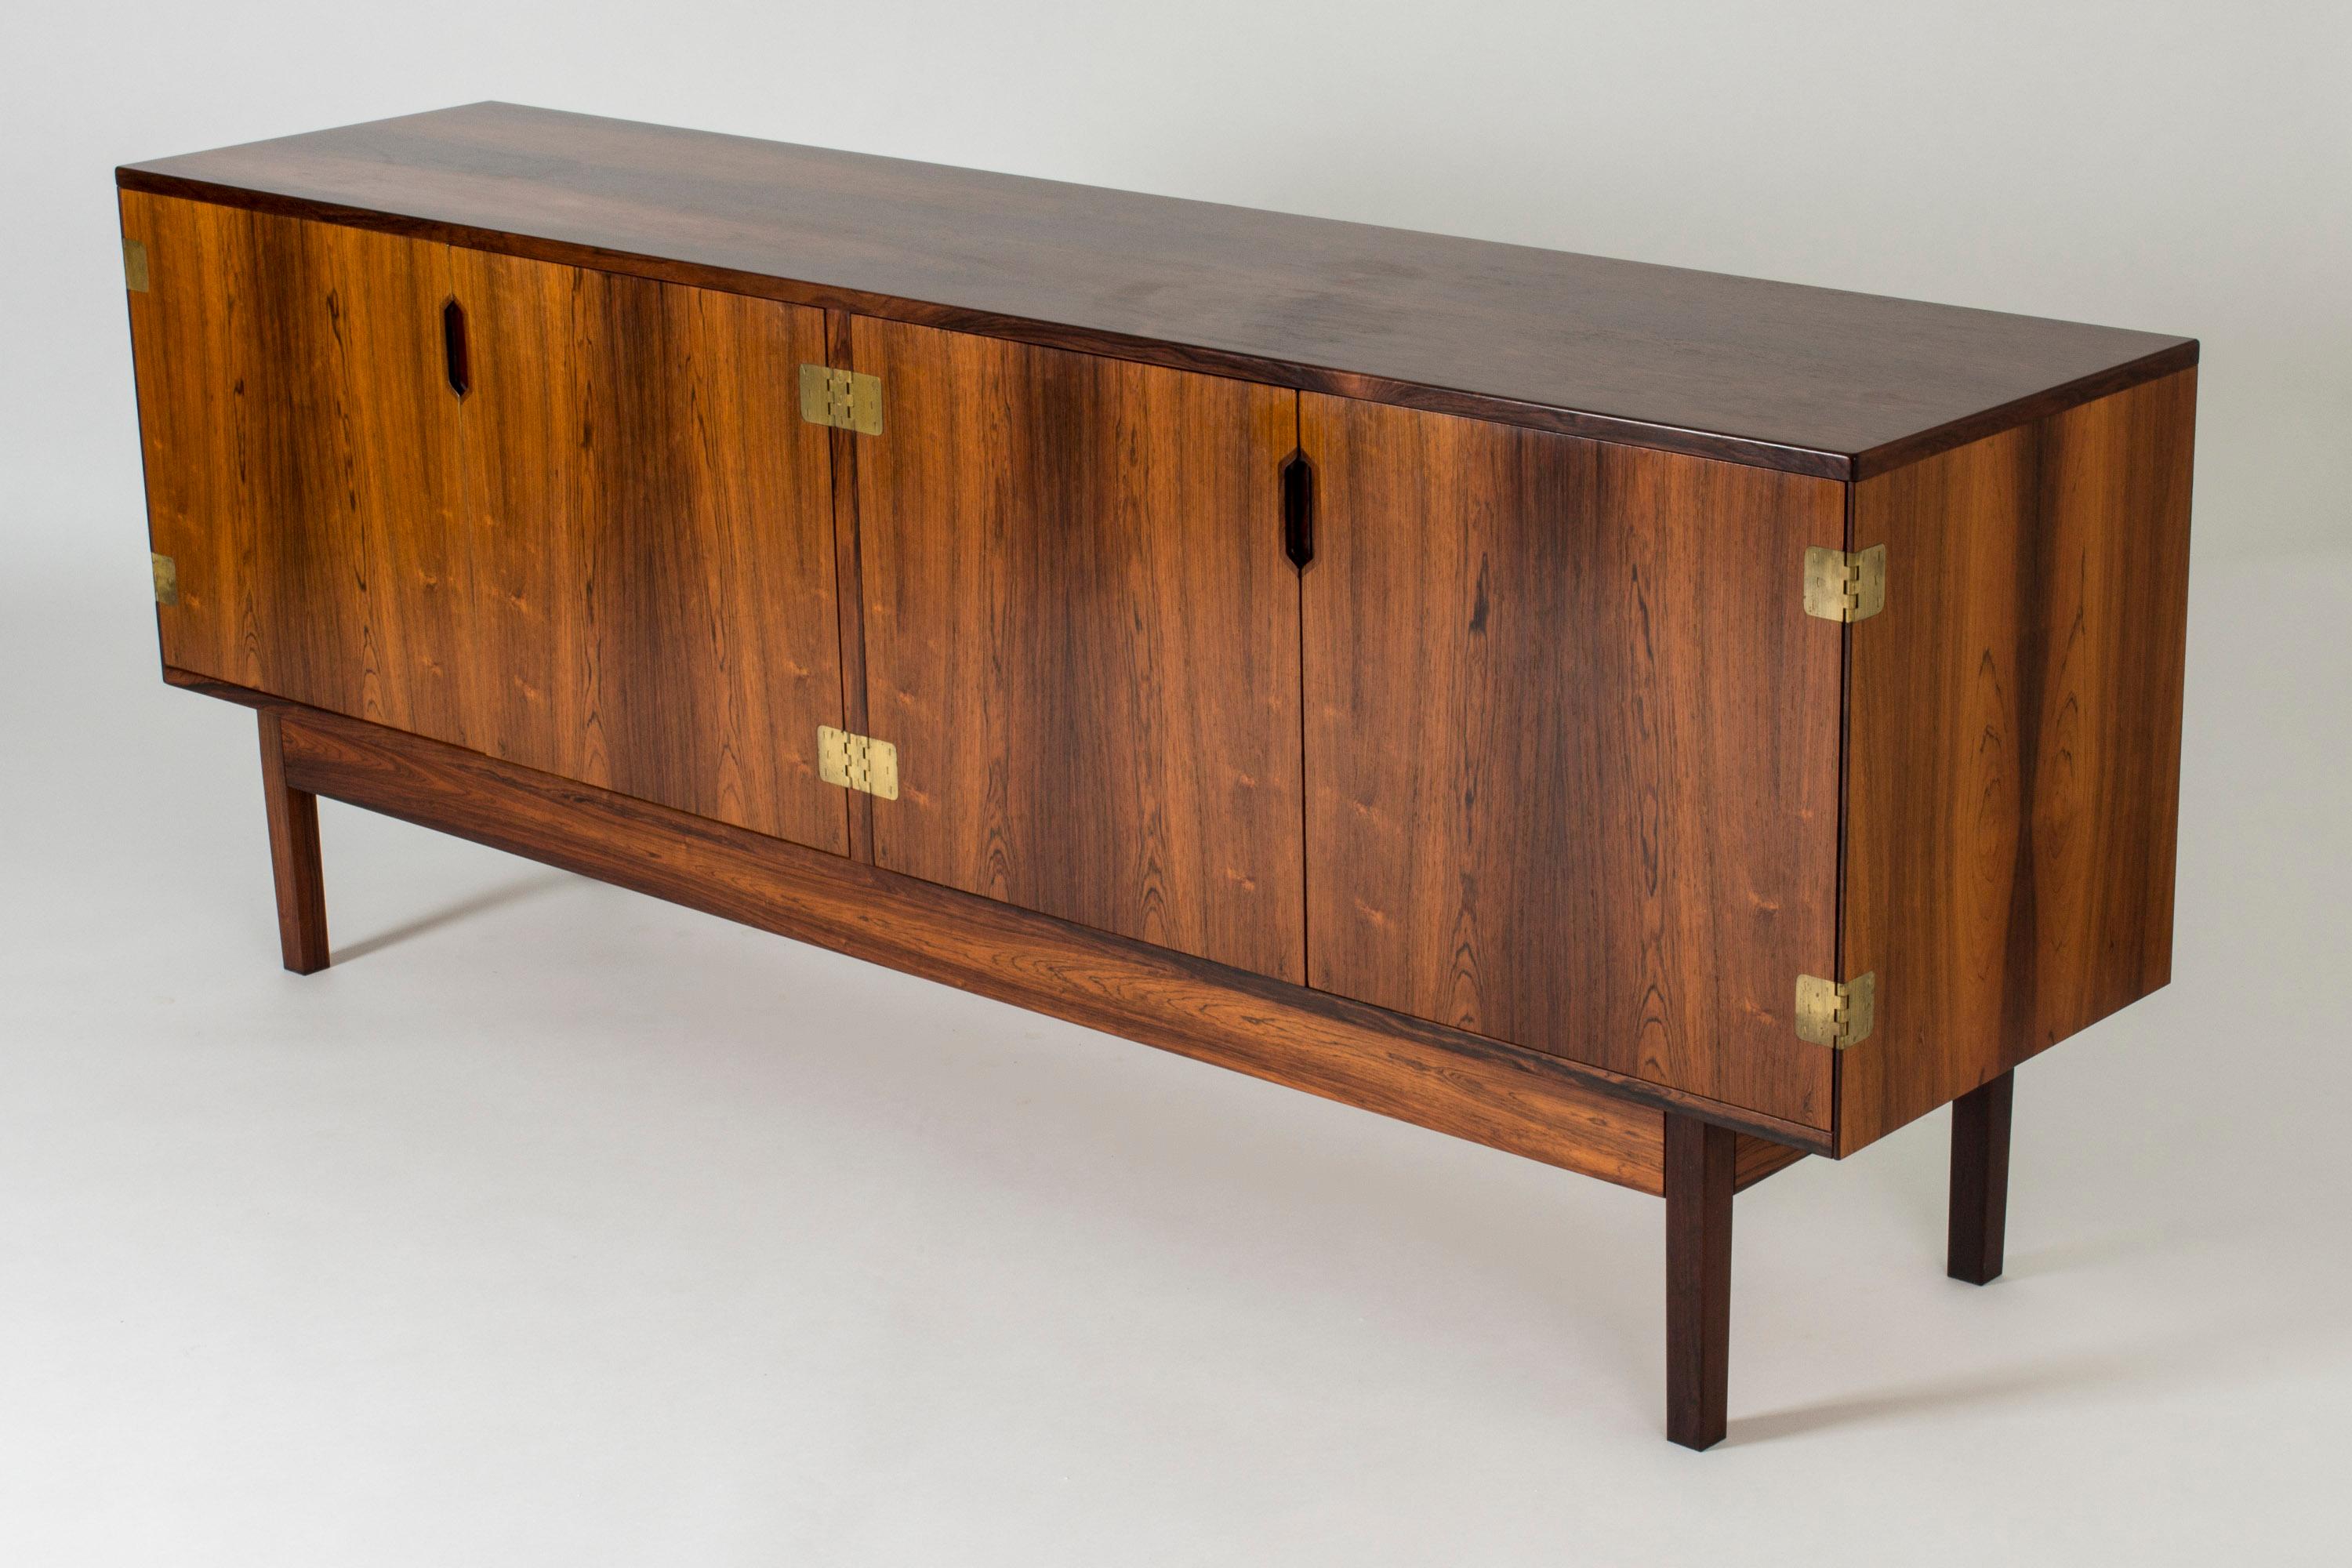 Scandinavian Modern Danish Midcentury Rosewood and Brass Sideboard by Svend Langkilde, 1960s For Sale